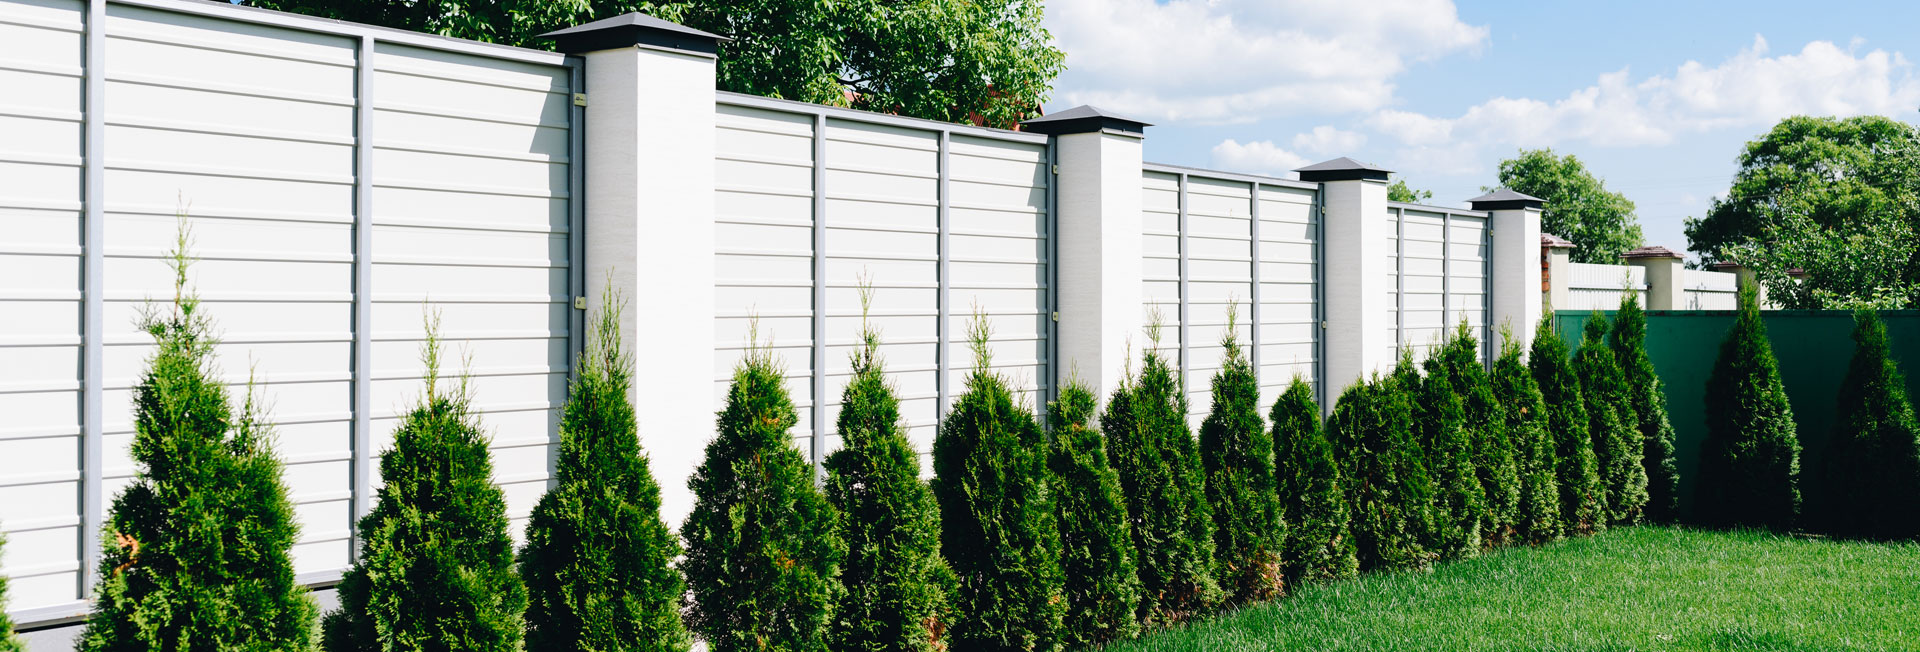 How Do I Secure The Best Cary Fence Financing? - Superior Fence & Rail, Inc.